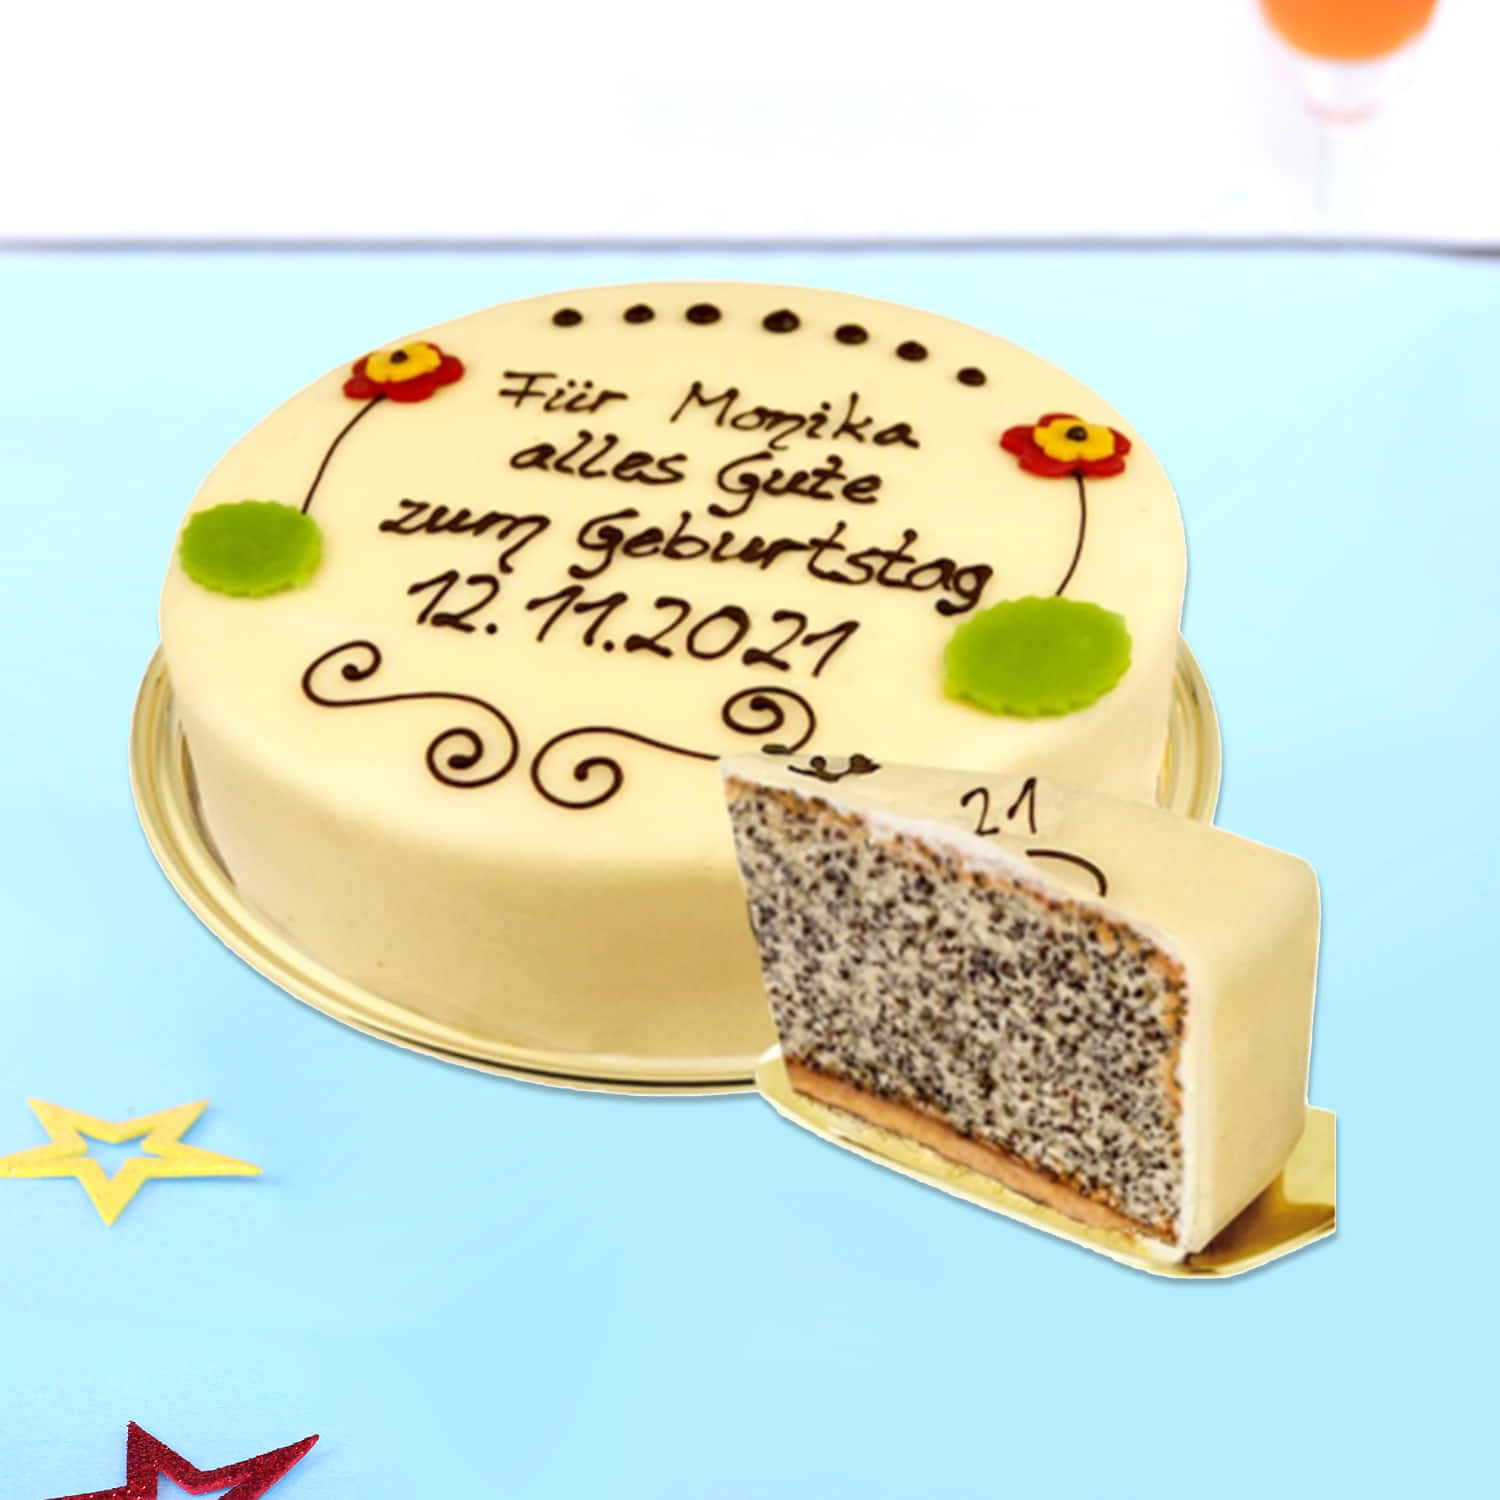 Aggregate 80+ cake delivery uk wide latest - awesomeenglish.edu.vn